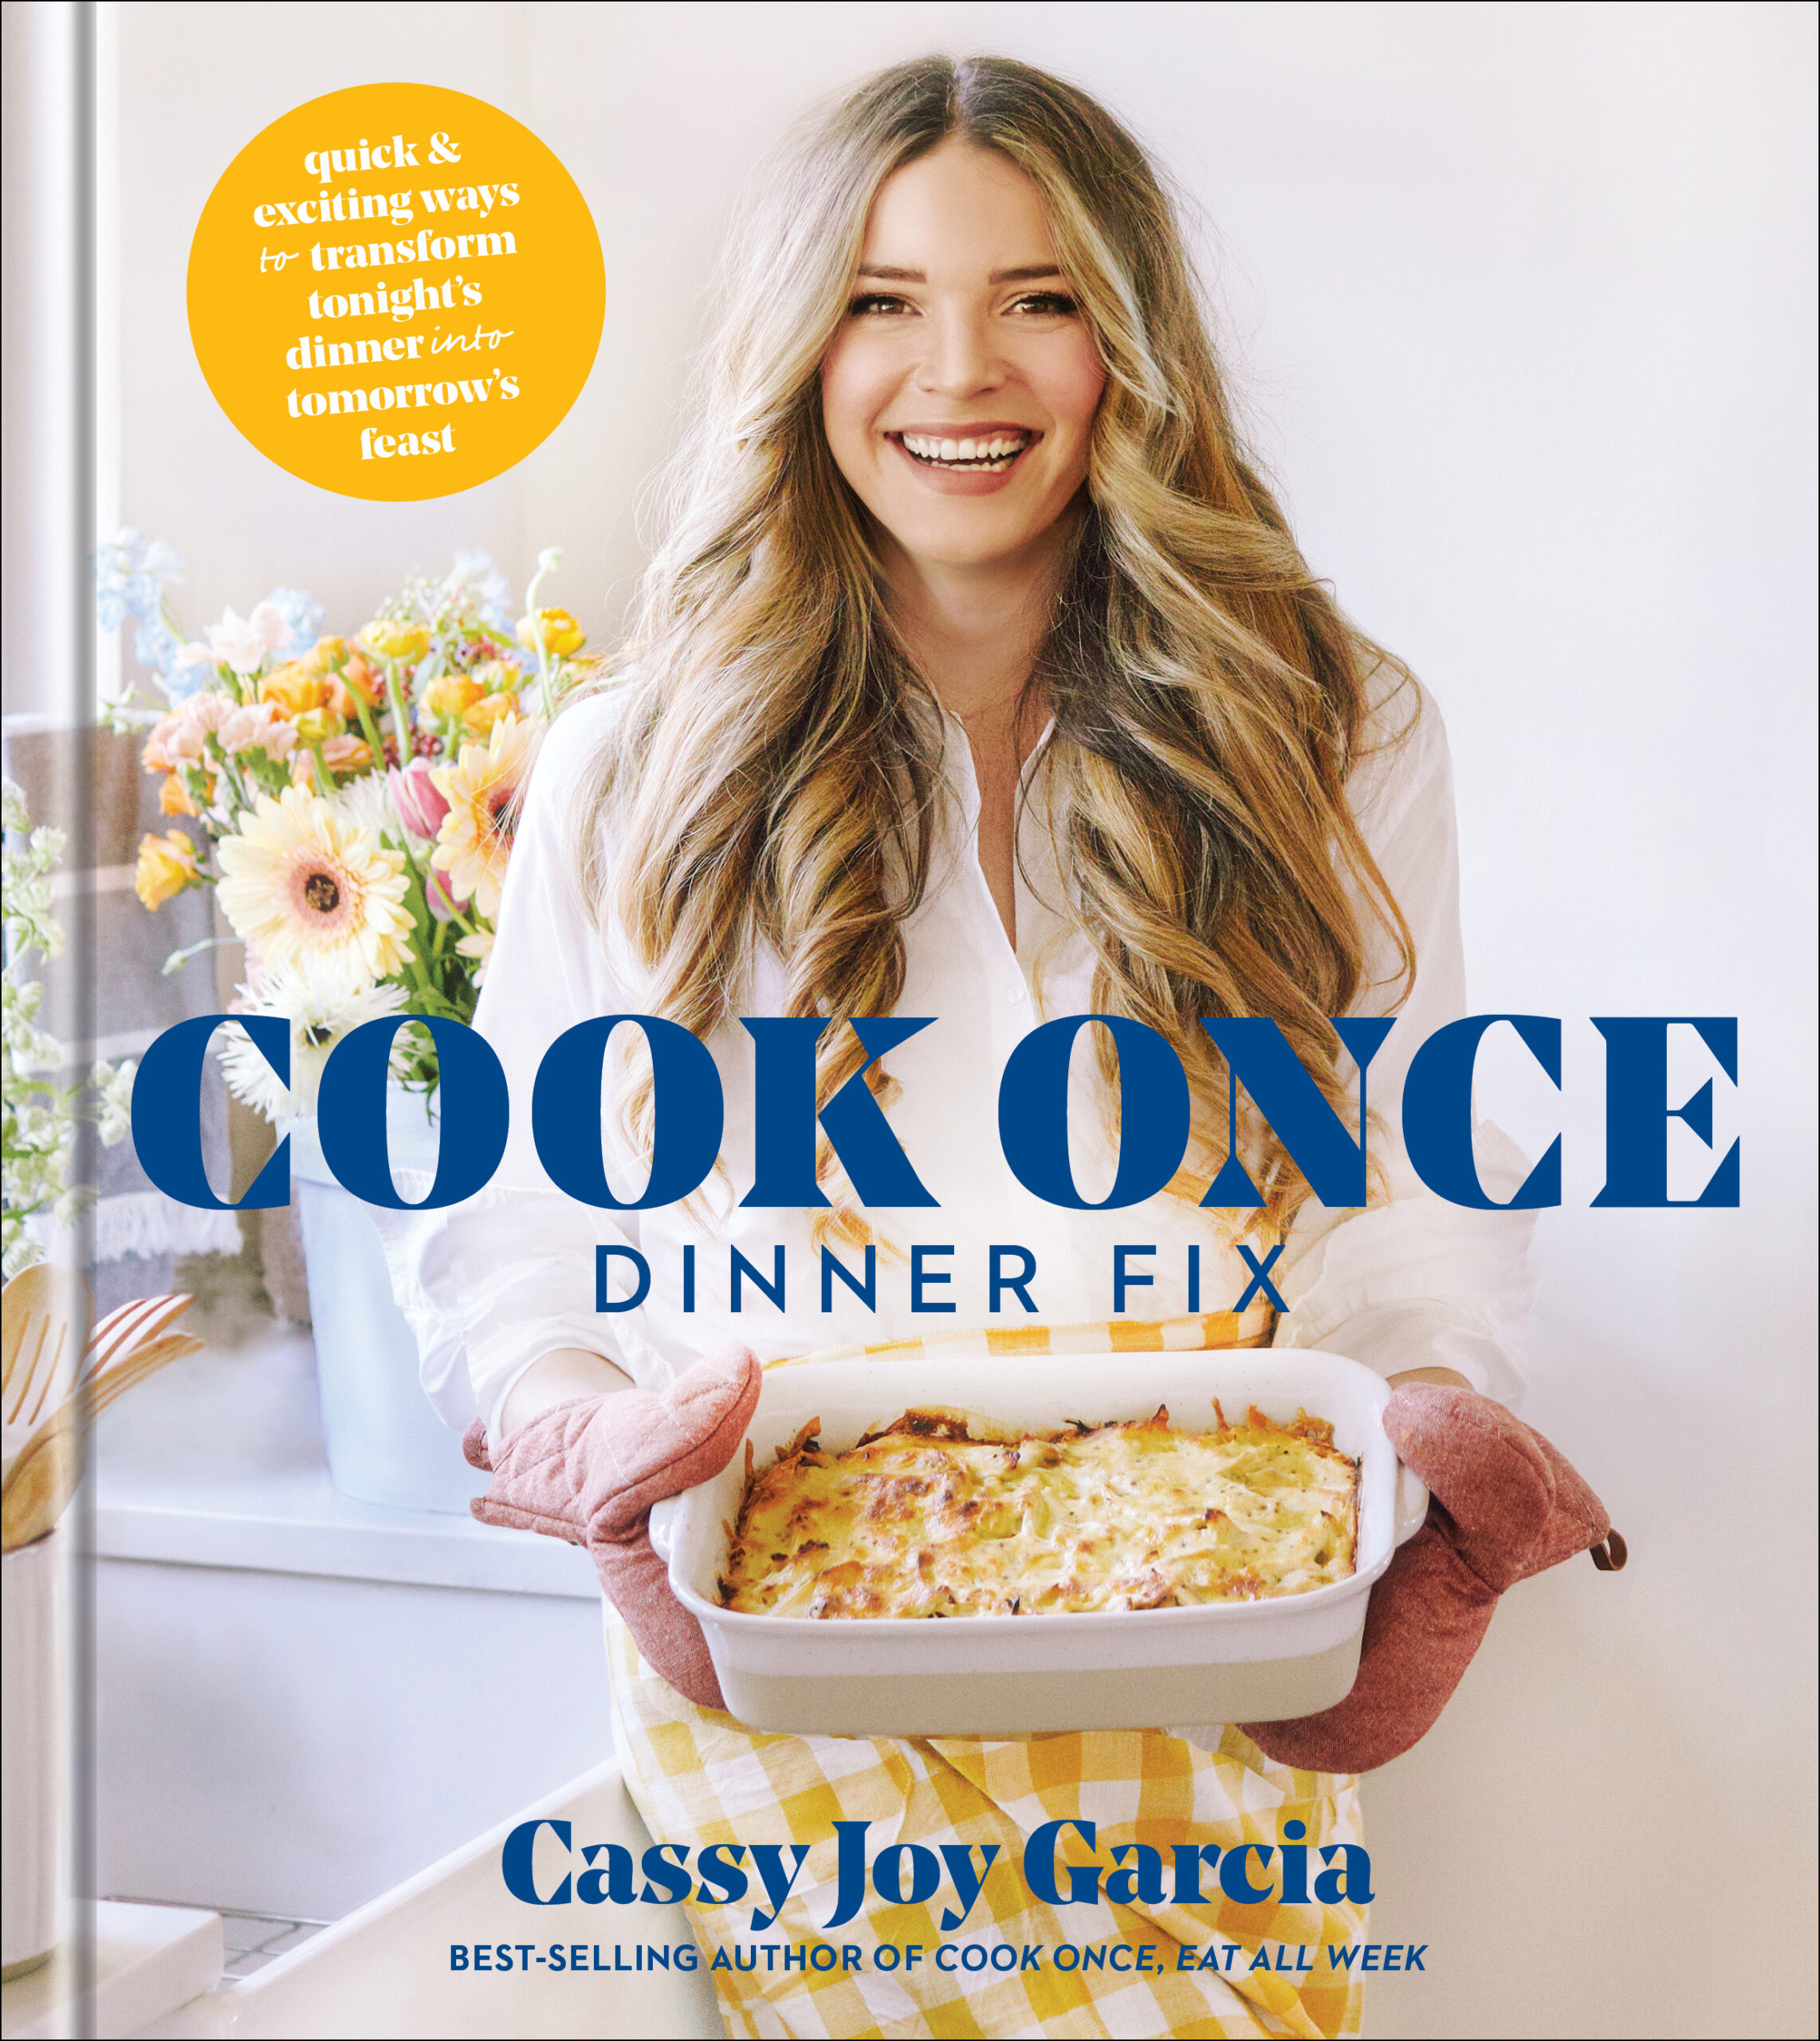 Buy the Cook Once Dinner Fix cookbook